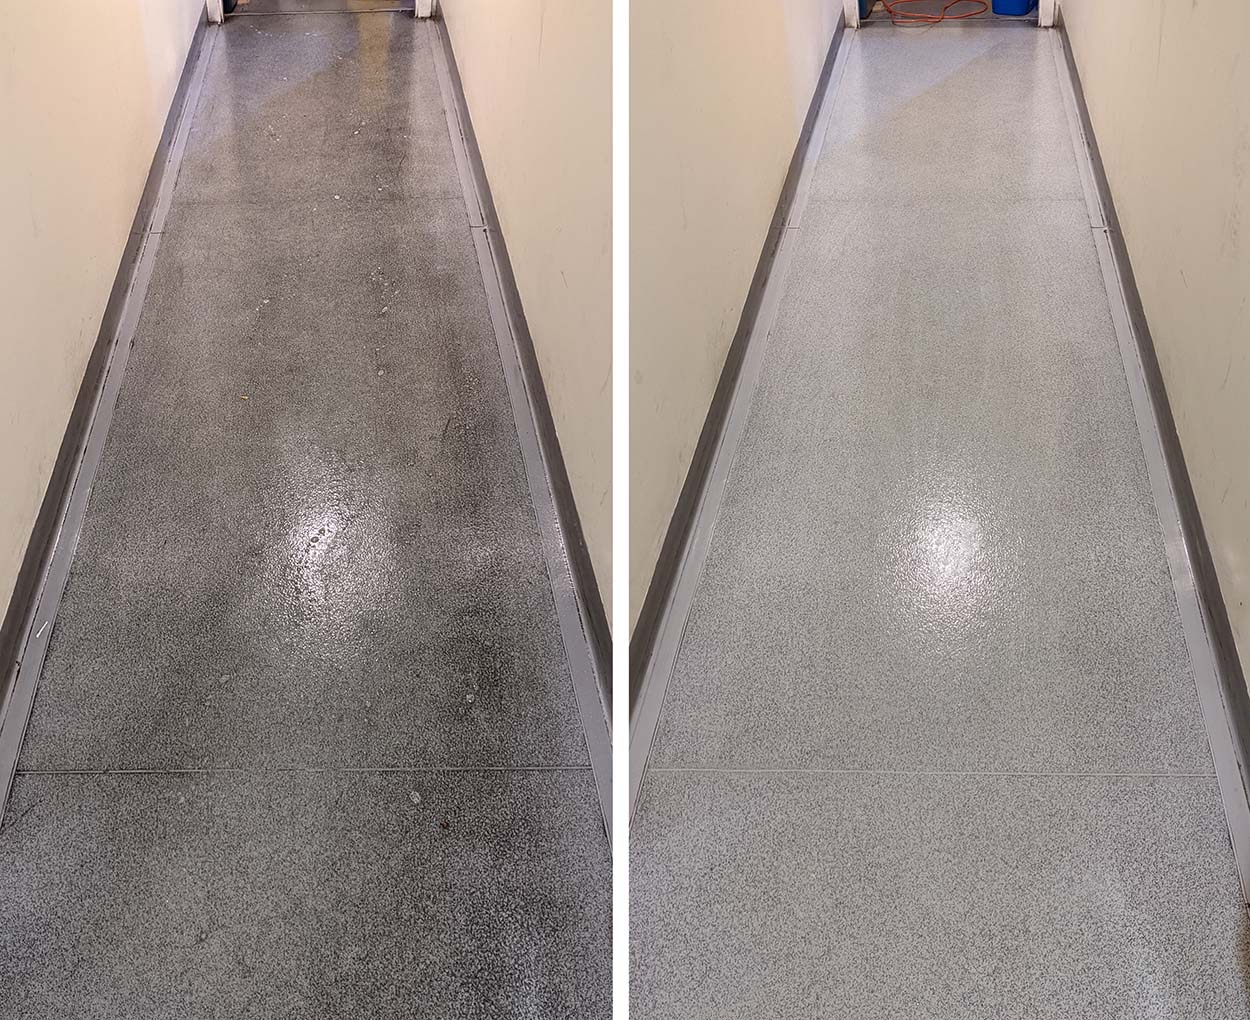 factory floor halway cleaning before after